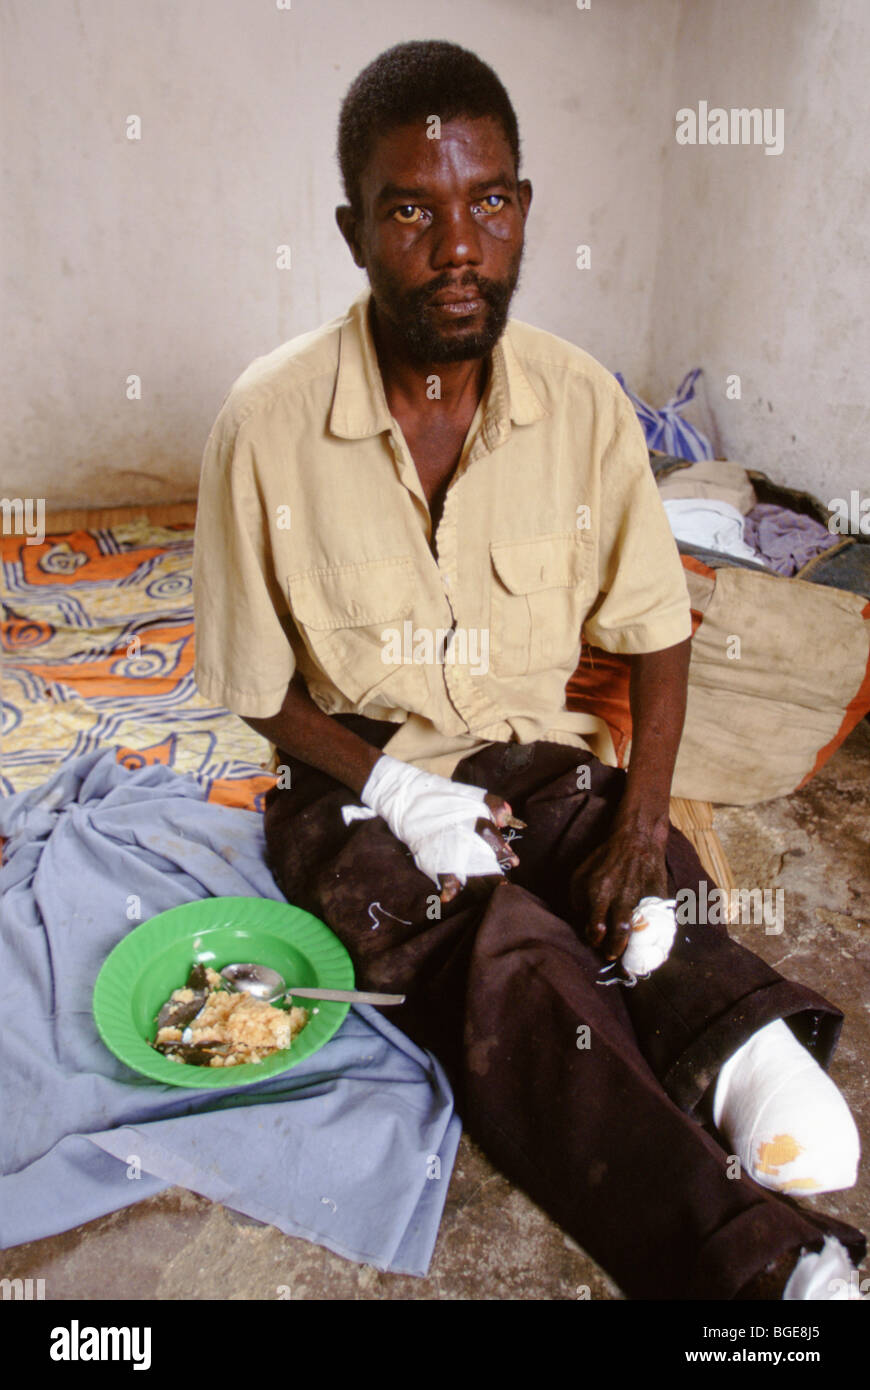 A resident in a leper colony, Luanda, Angola.  He is badly affected by leprosy. Stock Photo